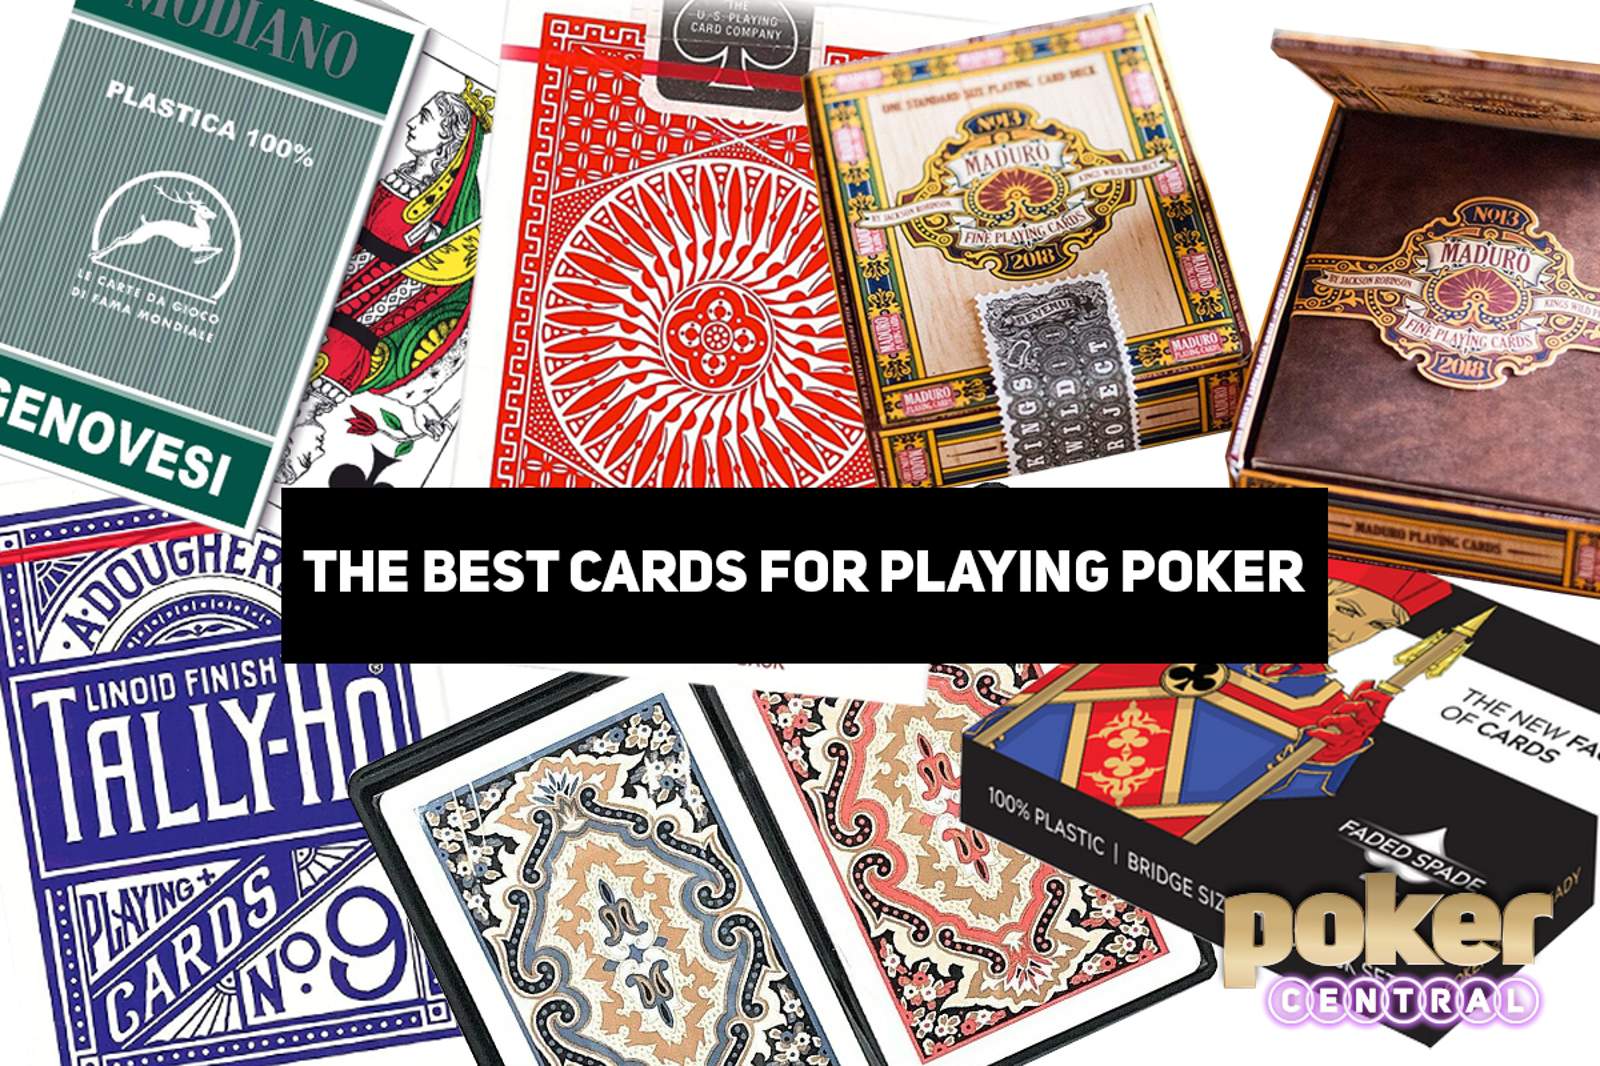 The Best Cards for Playing Poker